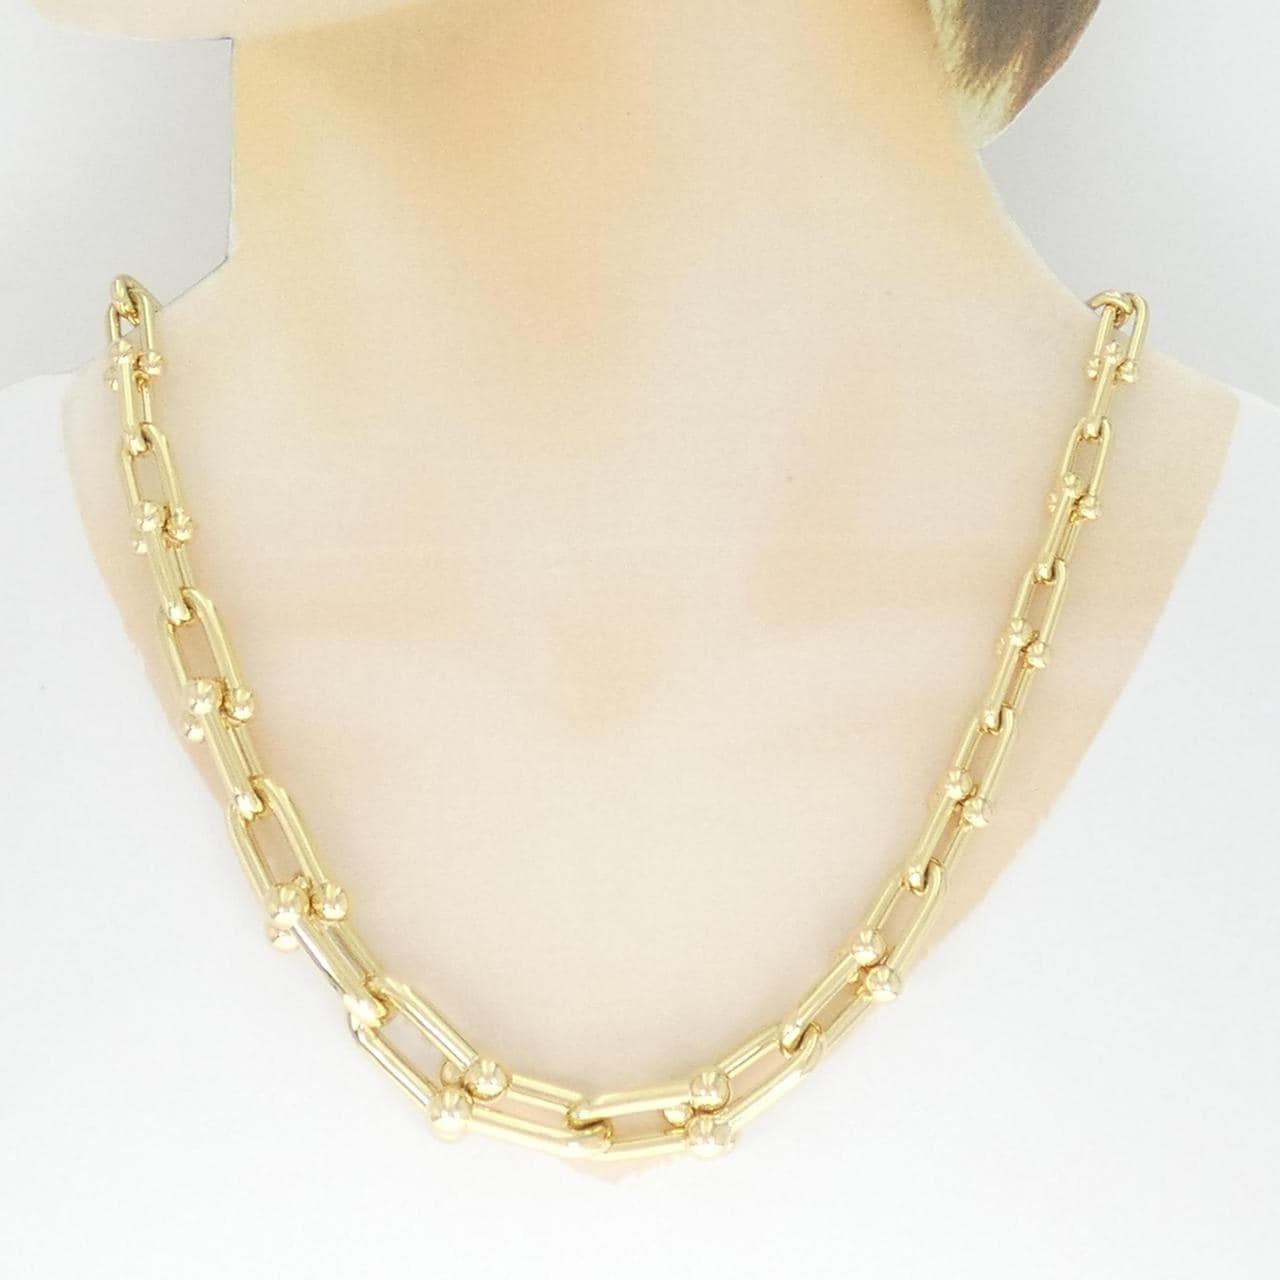 [BRAND NEW] TIFFANY Graduated Link Necklace